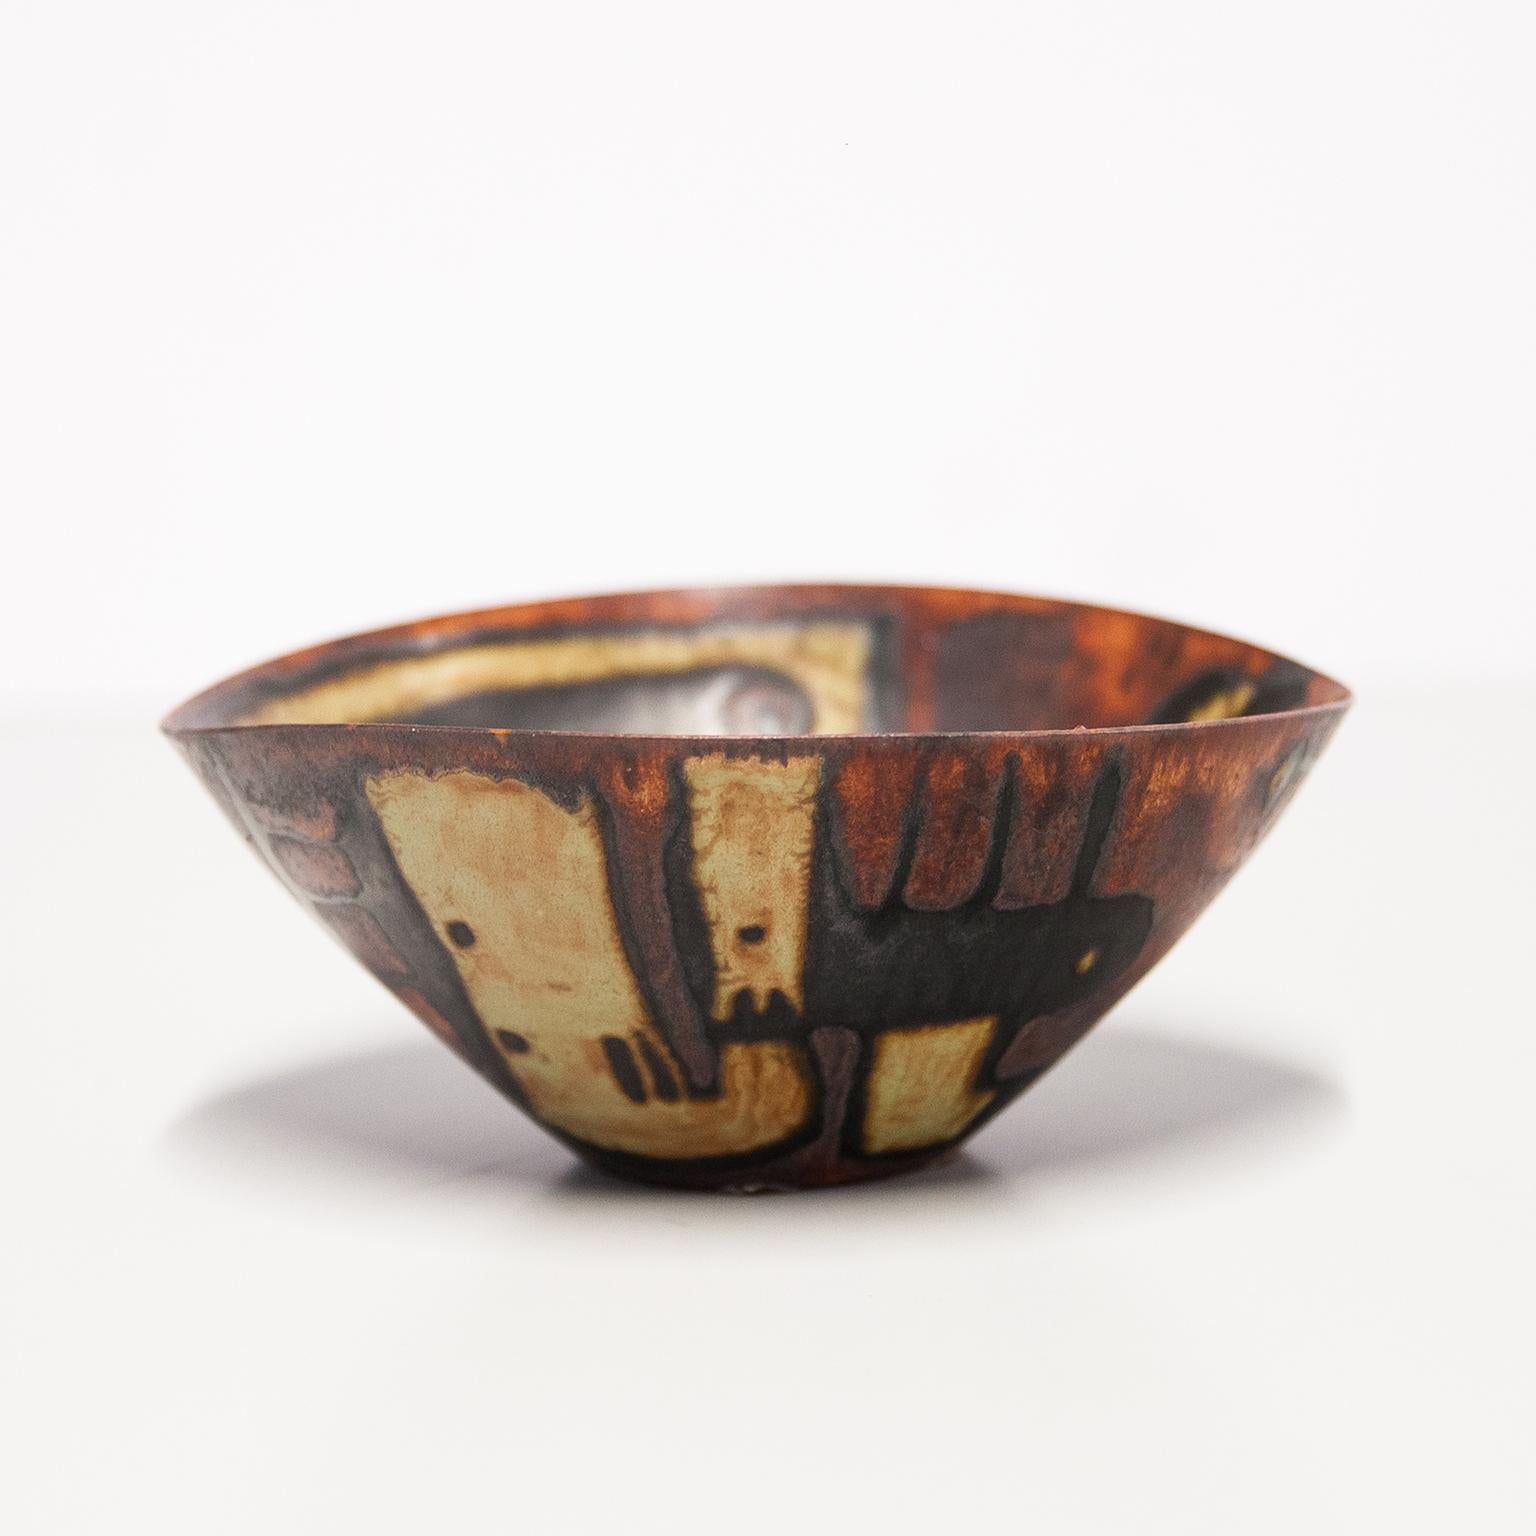 Wonderful early work of the famous German ceramic Artist Beate Kuhn from the 1960s. The bowl is designed in red, white and black glazed ceramic with an abstract forms. Artist signature workshop mark spiral (stamp) is at the bottom edge, but the